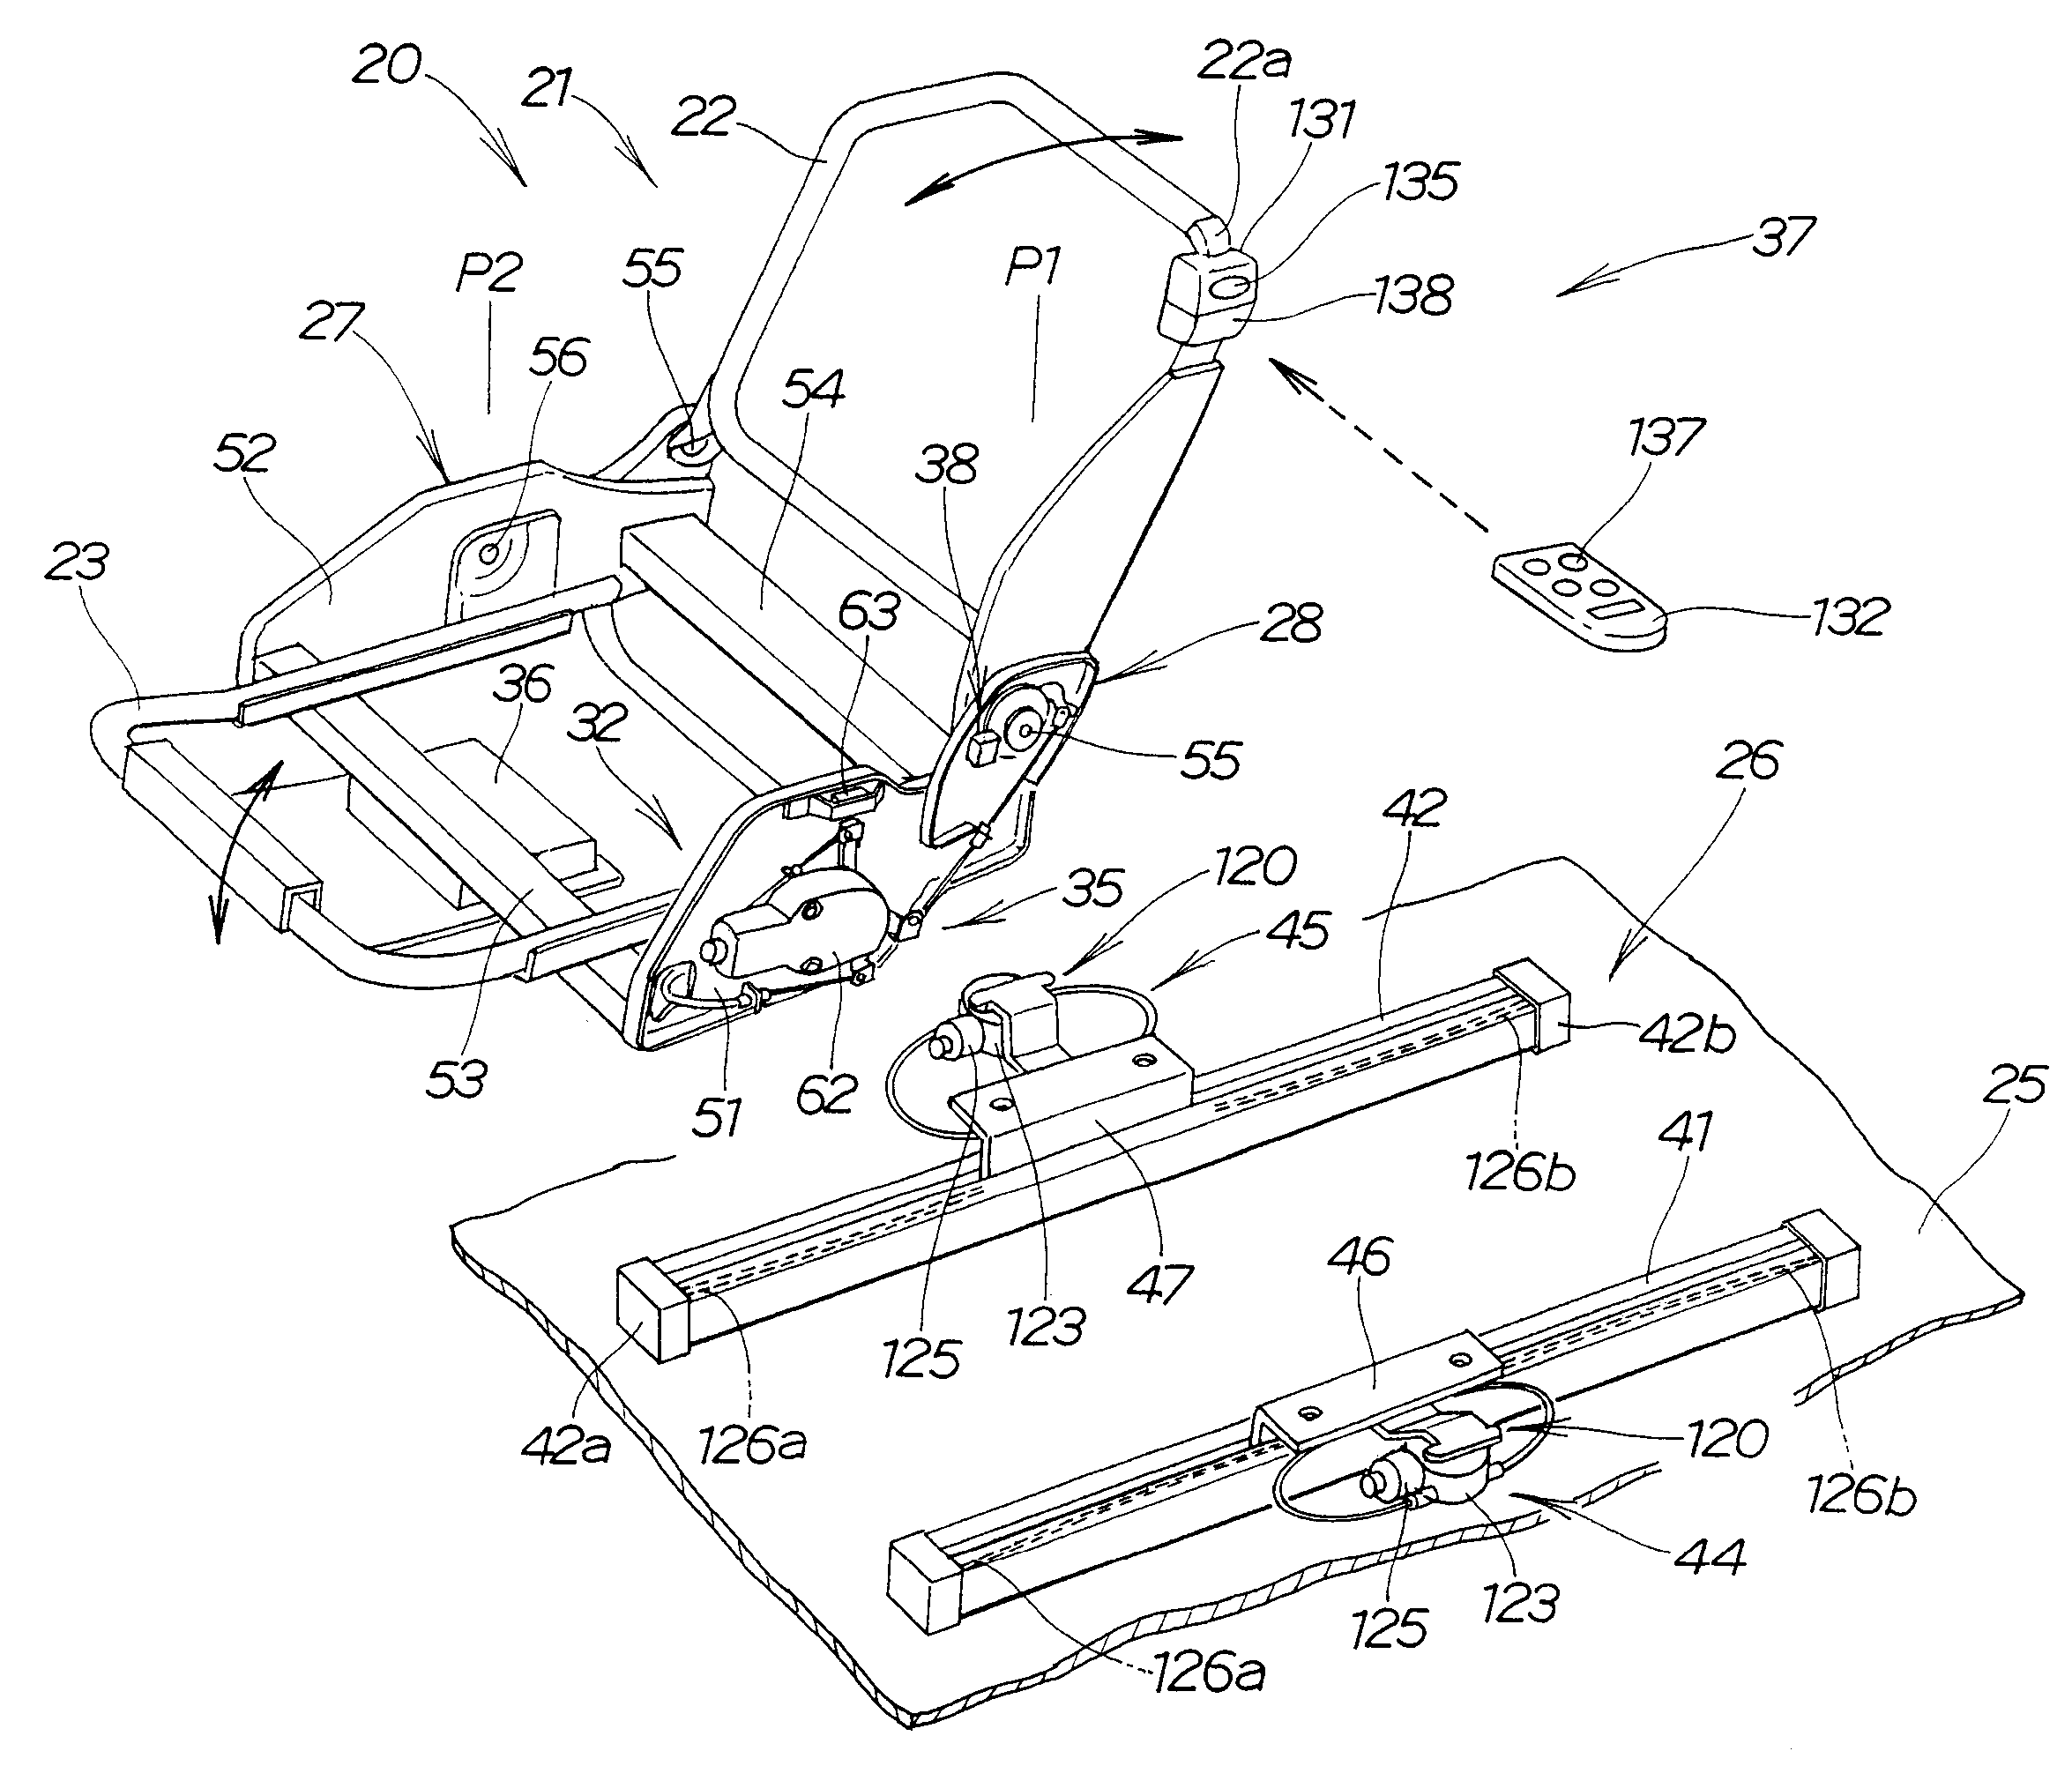 Folding seat apparatus for vehicle